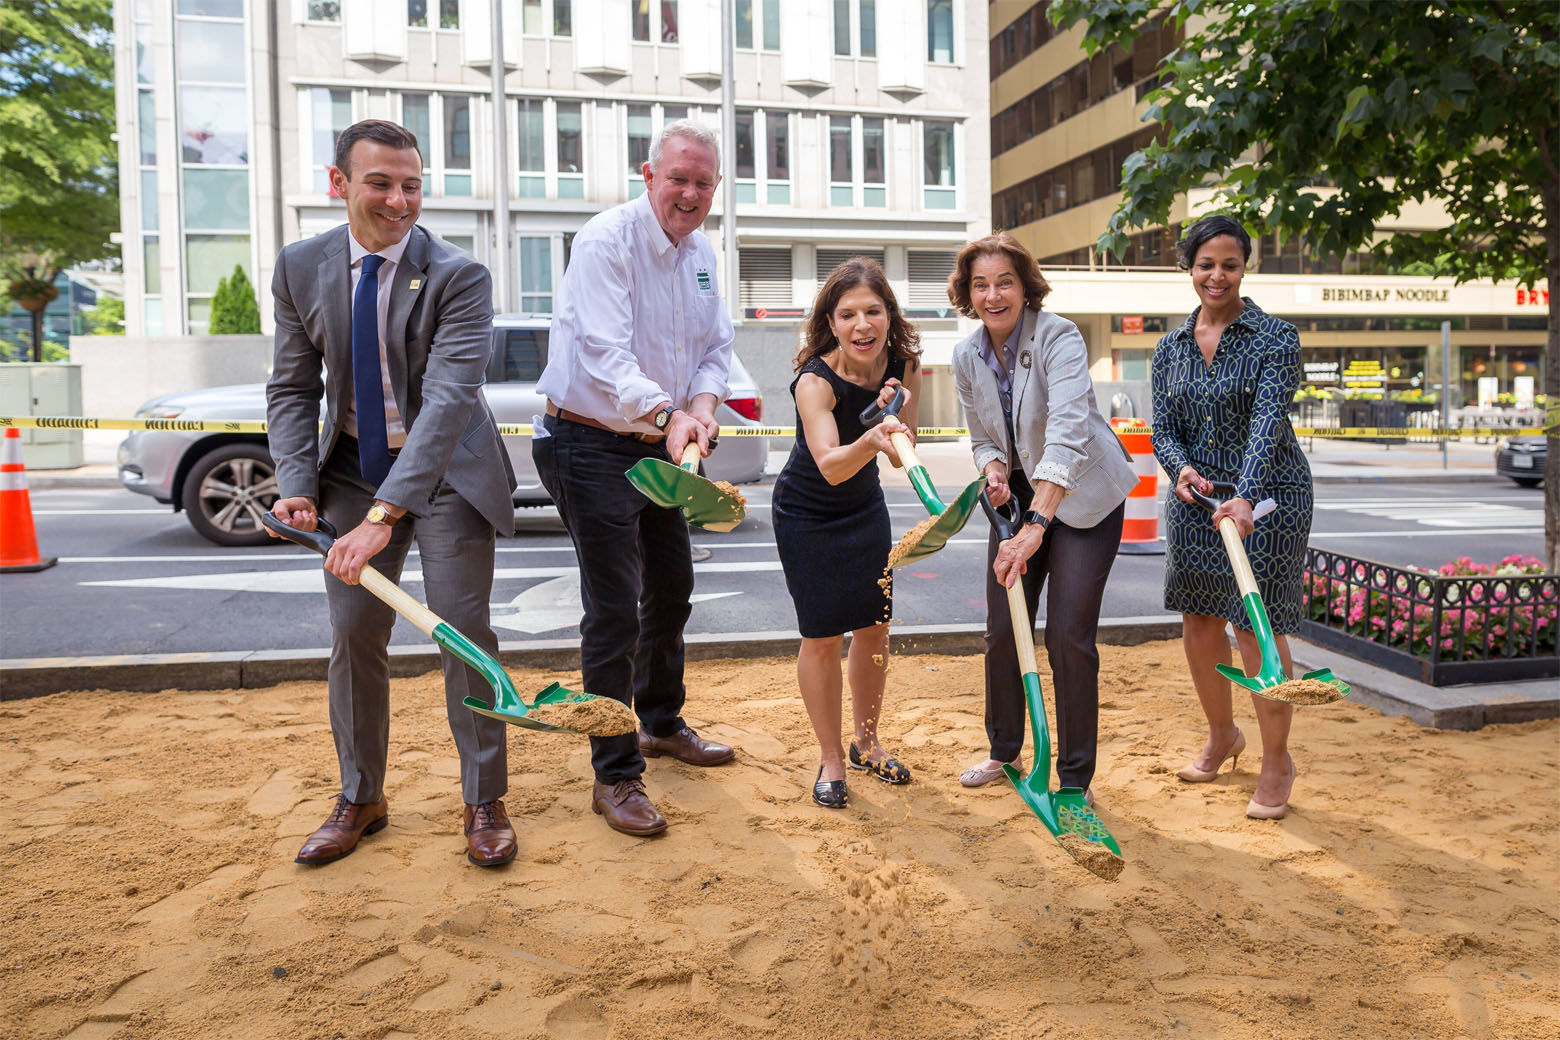 Director of the District Department of Transportation Jeff Marootian;  Director of the Department of Energy &amp; Environment Tommy Wells, Executive Director of the Golden Triangle Business Improvement District Leona Agouridis; D.C. Council Member Mary Cheh; and Pepco Region President Donna Cooper. The officials broke ground on broke ground on 10 new rain gardens and nine expanded tree boxes along 19th Street in Northwest D.C. (Courtesy Golden Triangle BID)